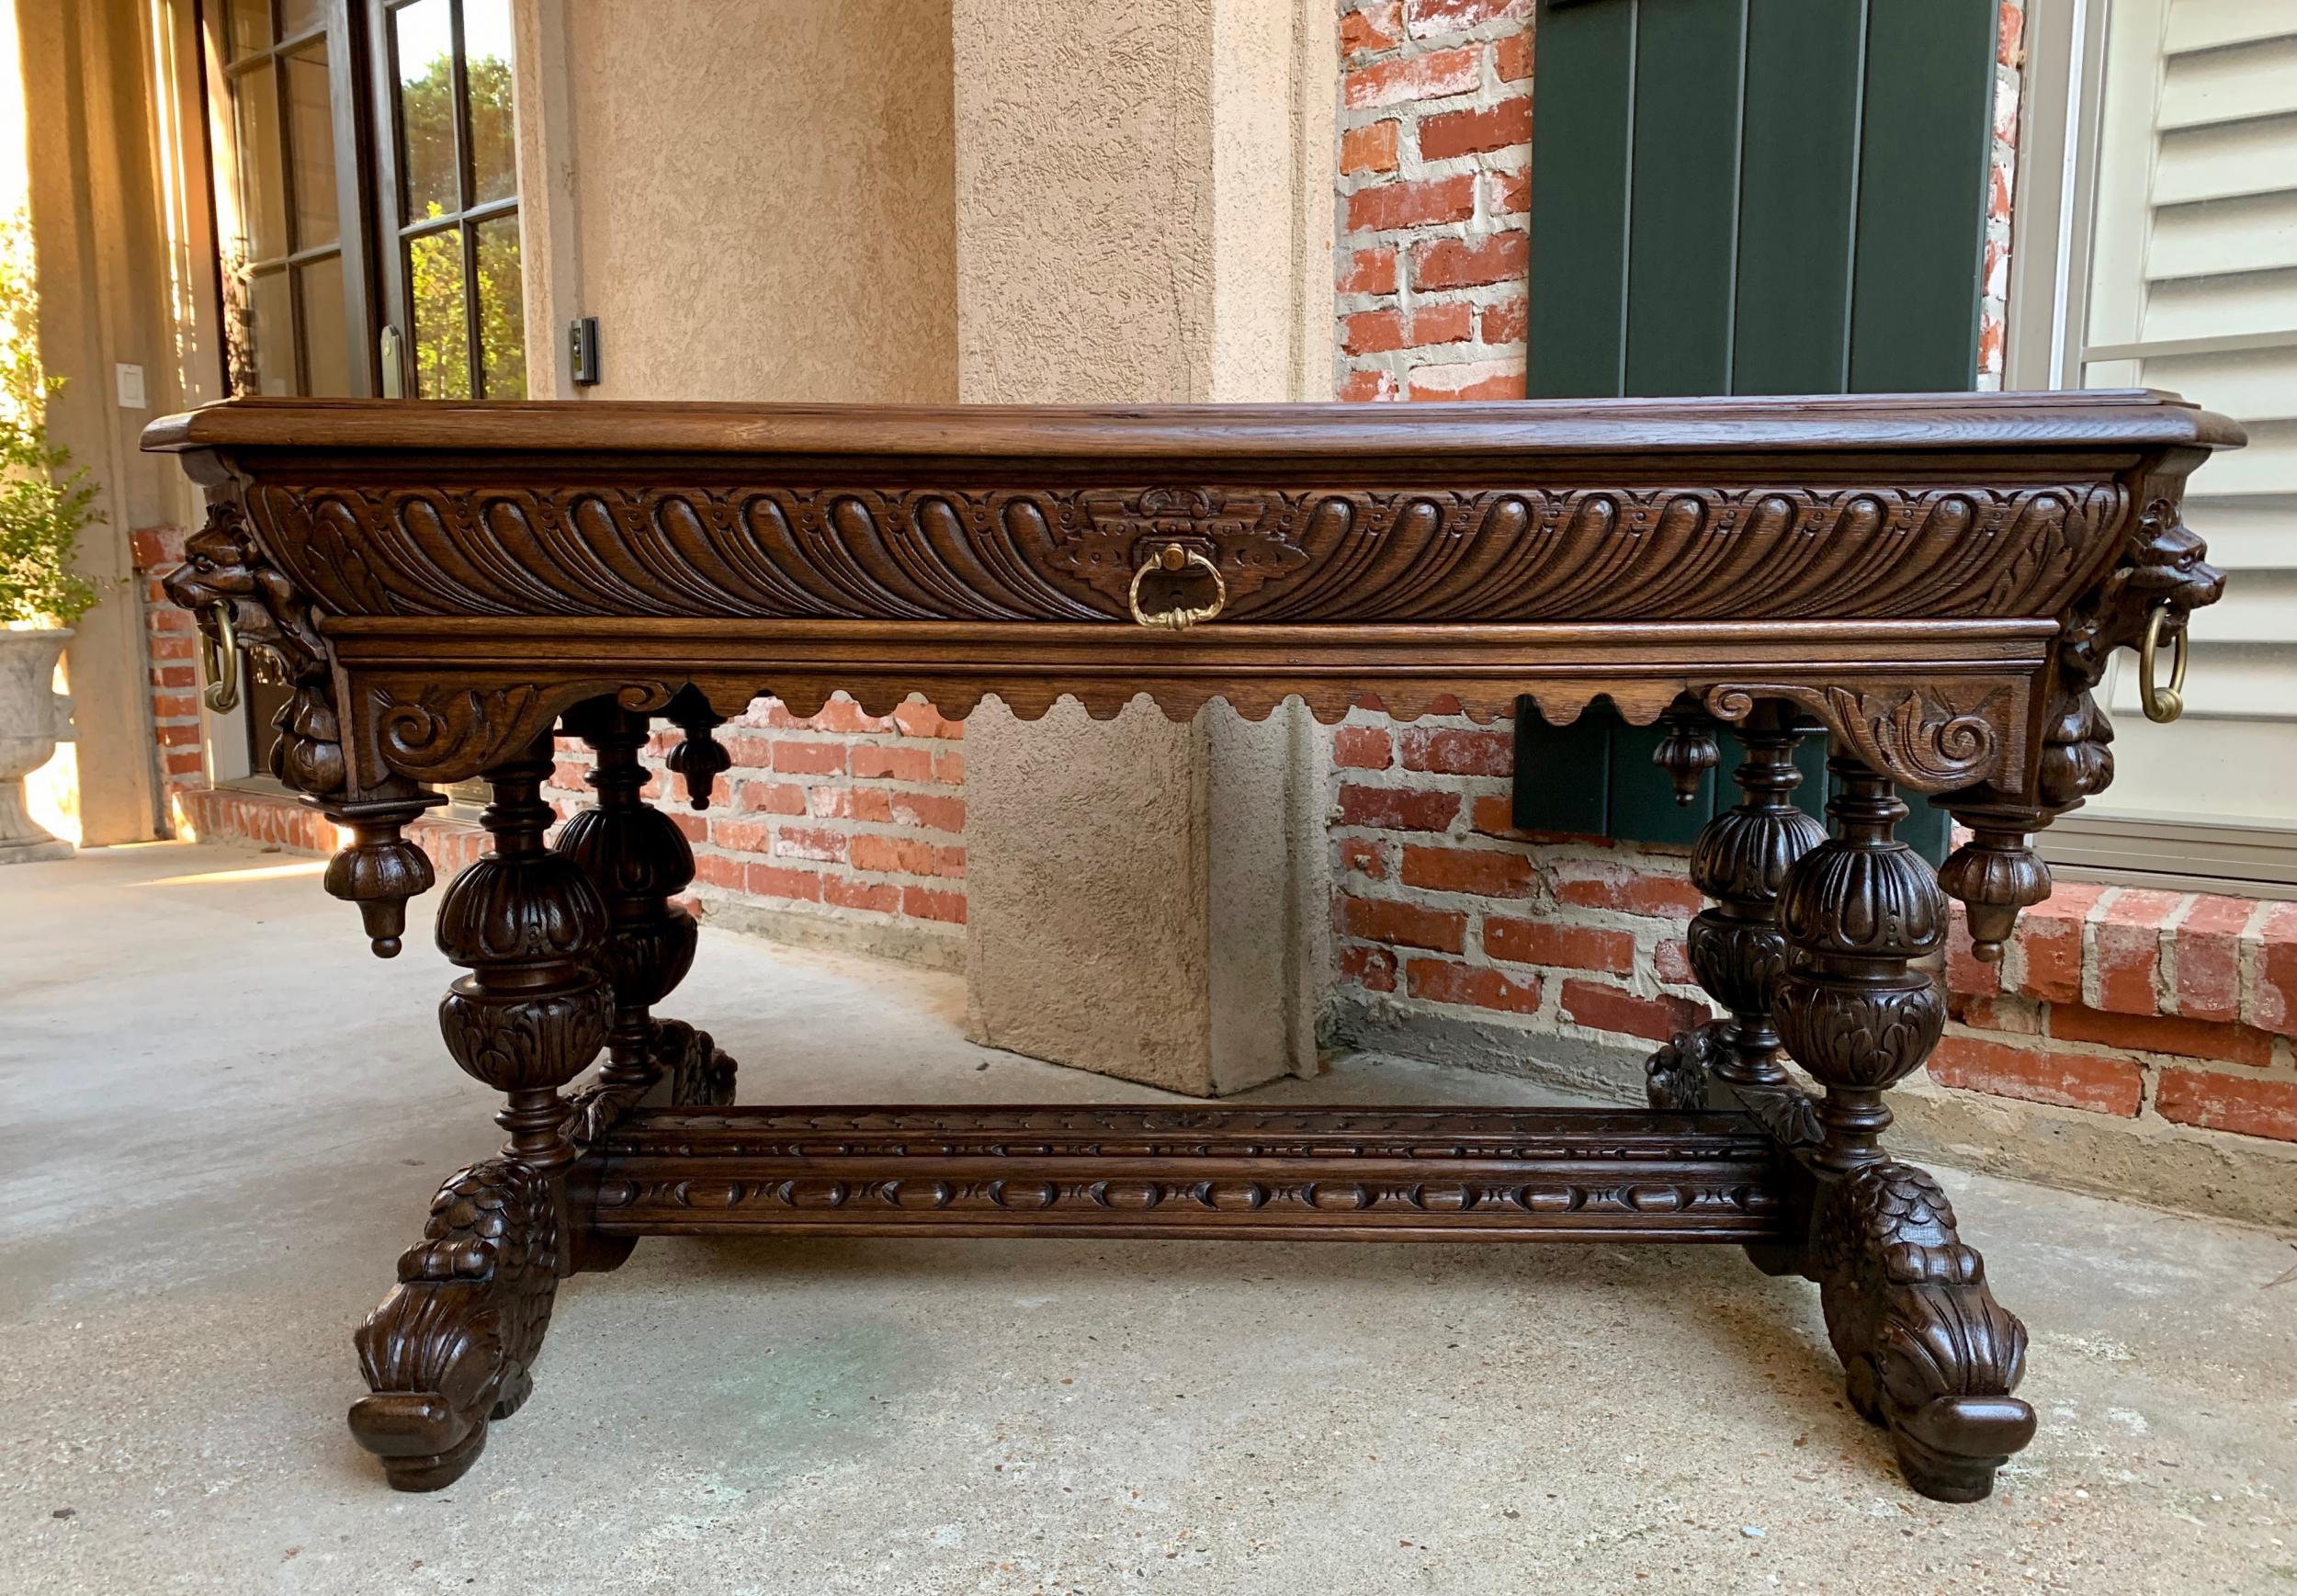 

19th century French Carved Oak Dolphin Library Table Desk Renaissance Gothic

~Direct from France~
An elegant antique FRENCH carved LIBRARY TABLE or 